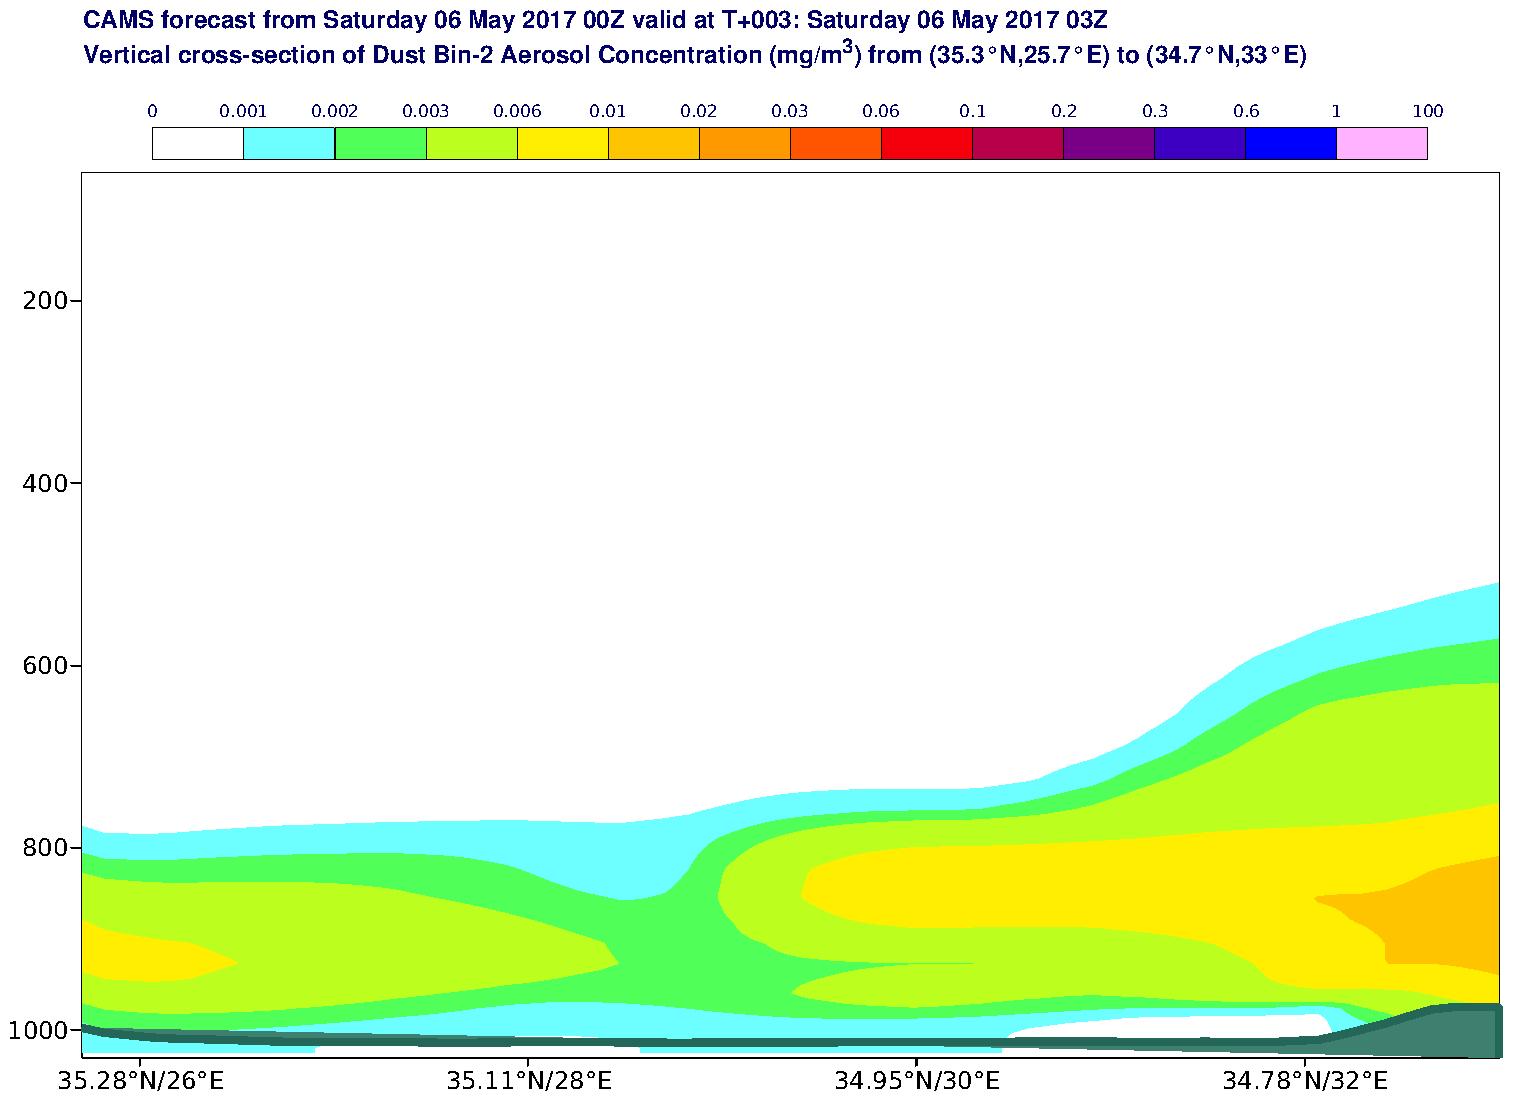 Vertical cross-section of Dust Bin-2 Aerosol Concentration (mg/m3) valid at T3 - 2017-05-06 03:00